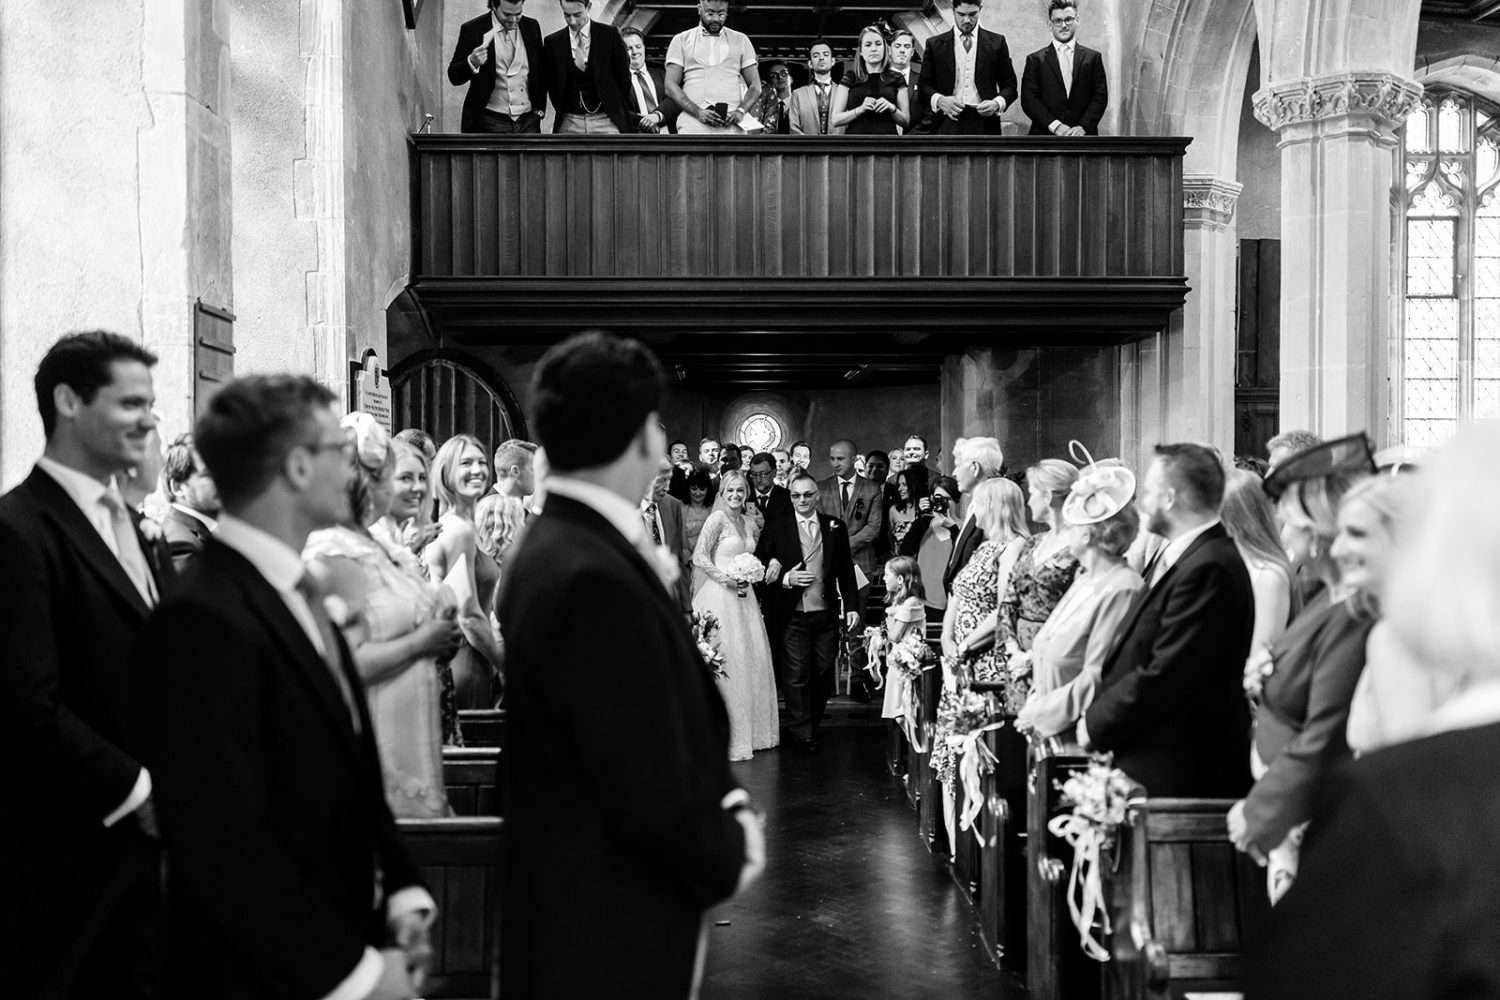 A black and white photo from a wedding in Suffolk at Hengrave hall. We see a Bride and her father as they come down the aisle at the Hall's little church at the start of the ceremony.  